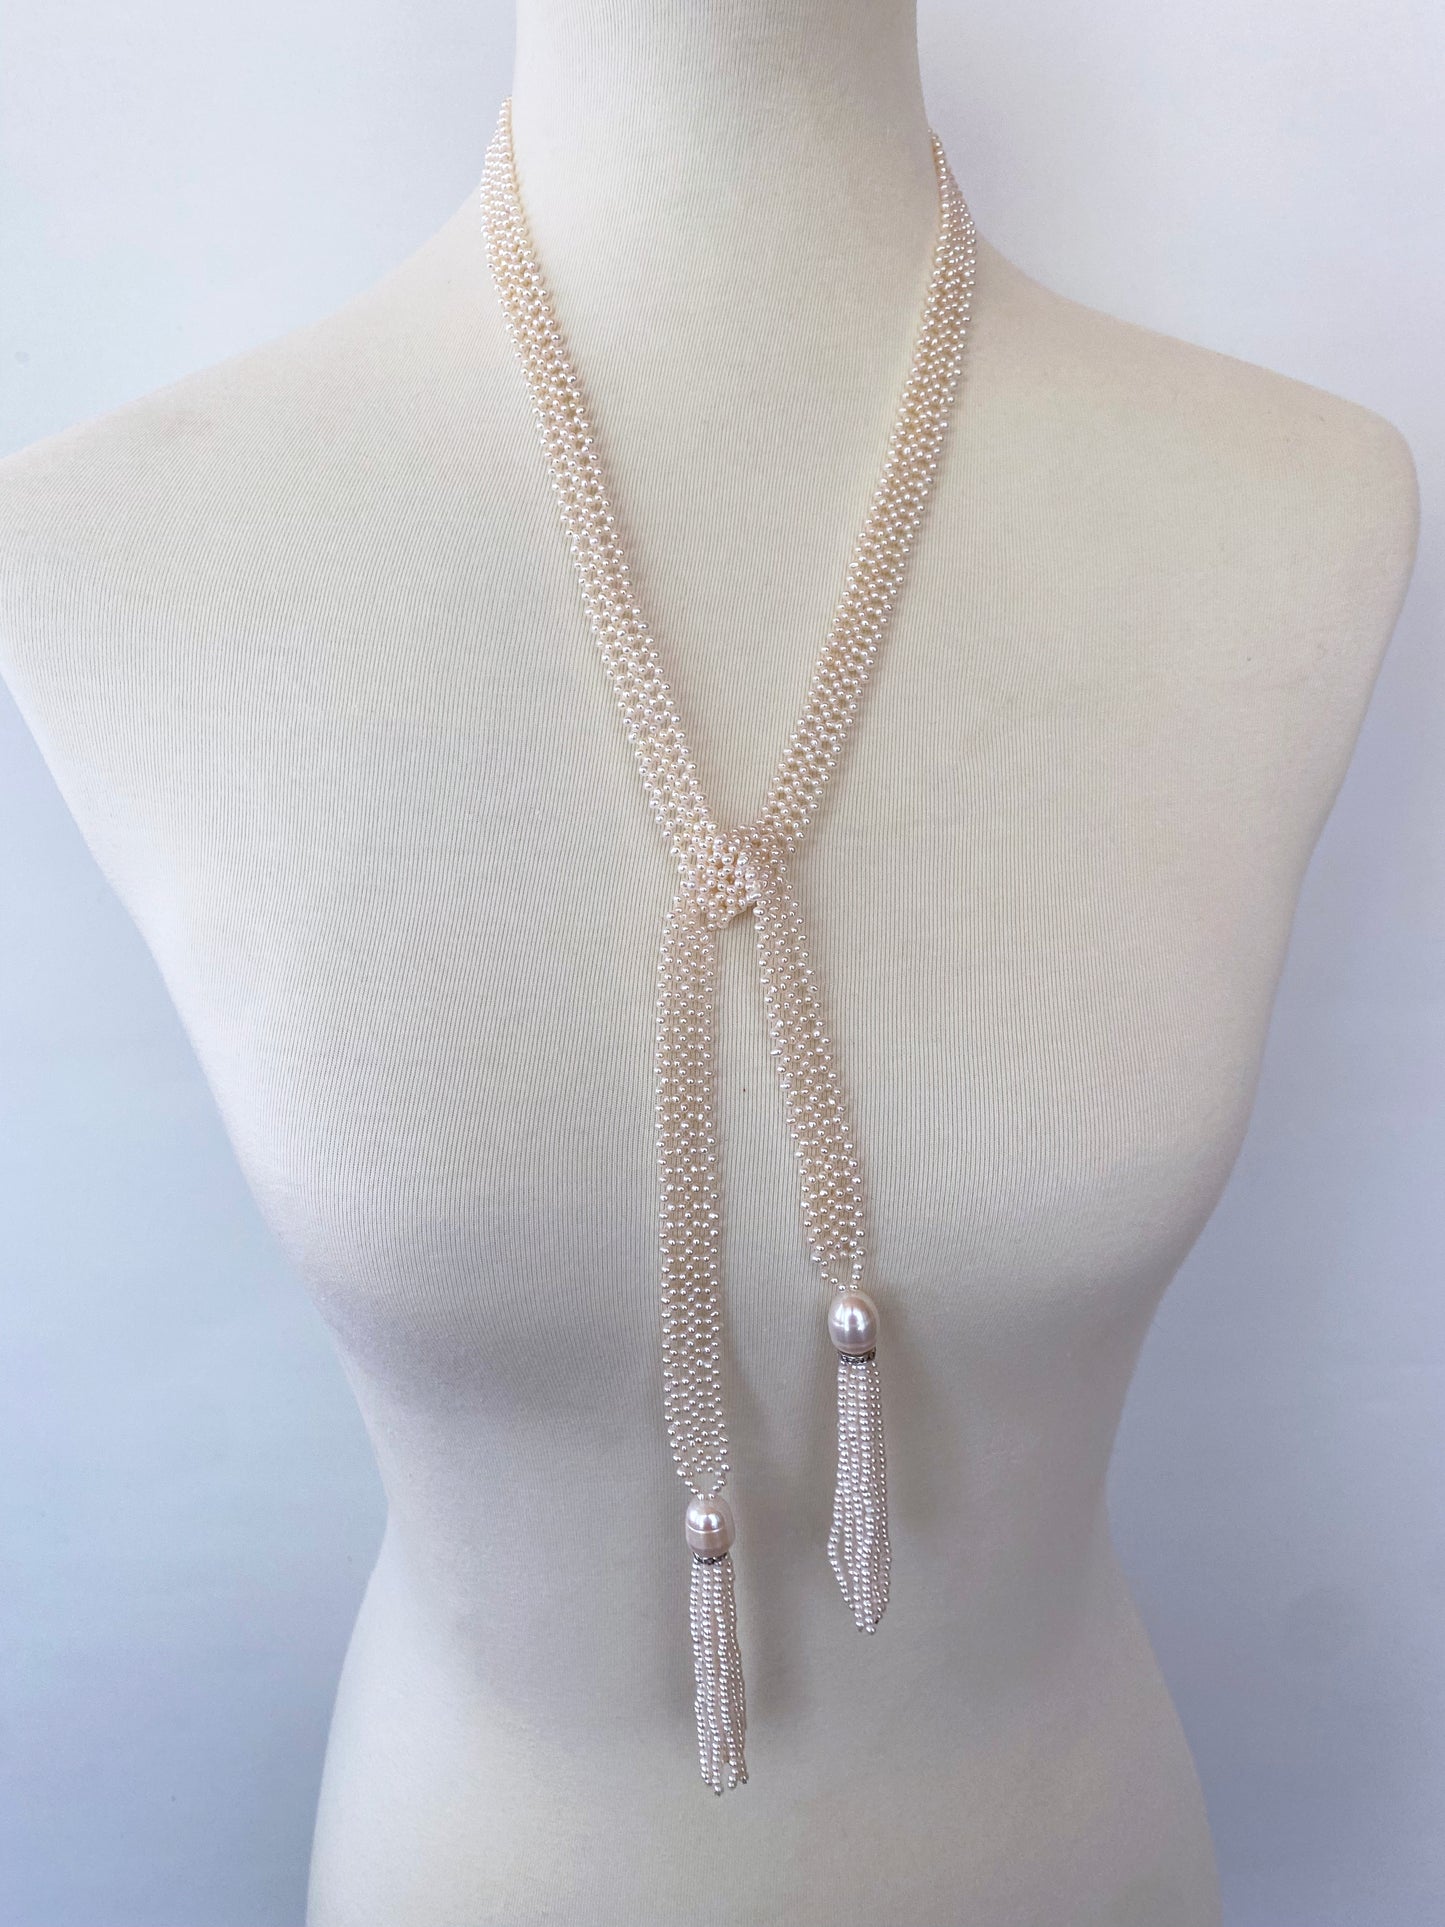 Lace Woven Open Pearl Sautoir with Diamond Encrusted Silver Tassels